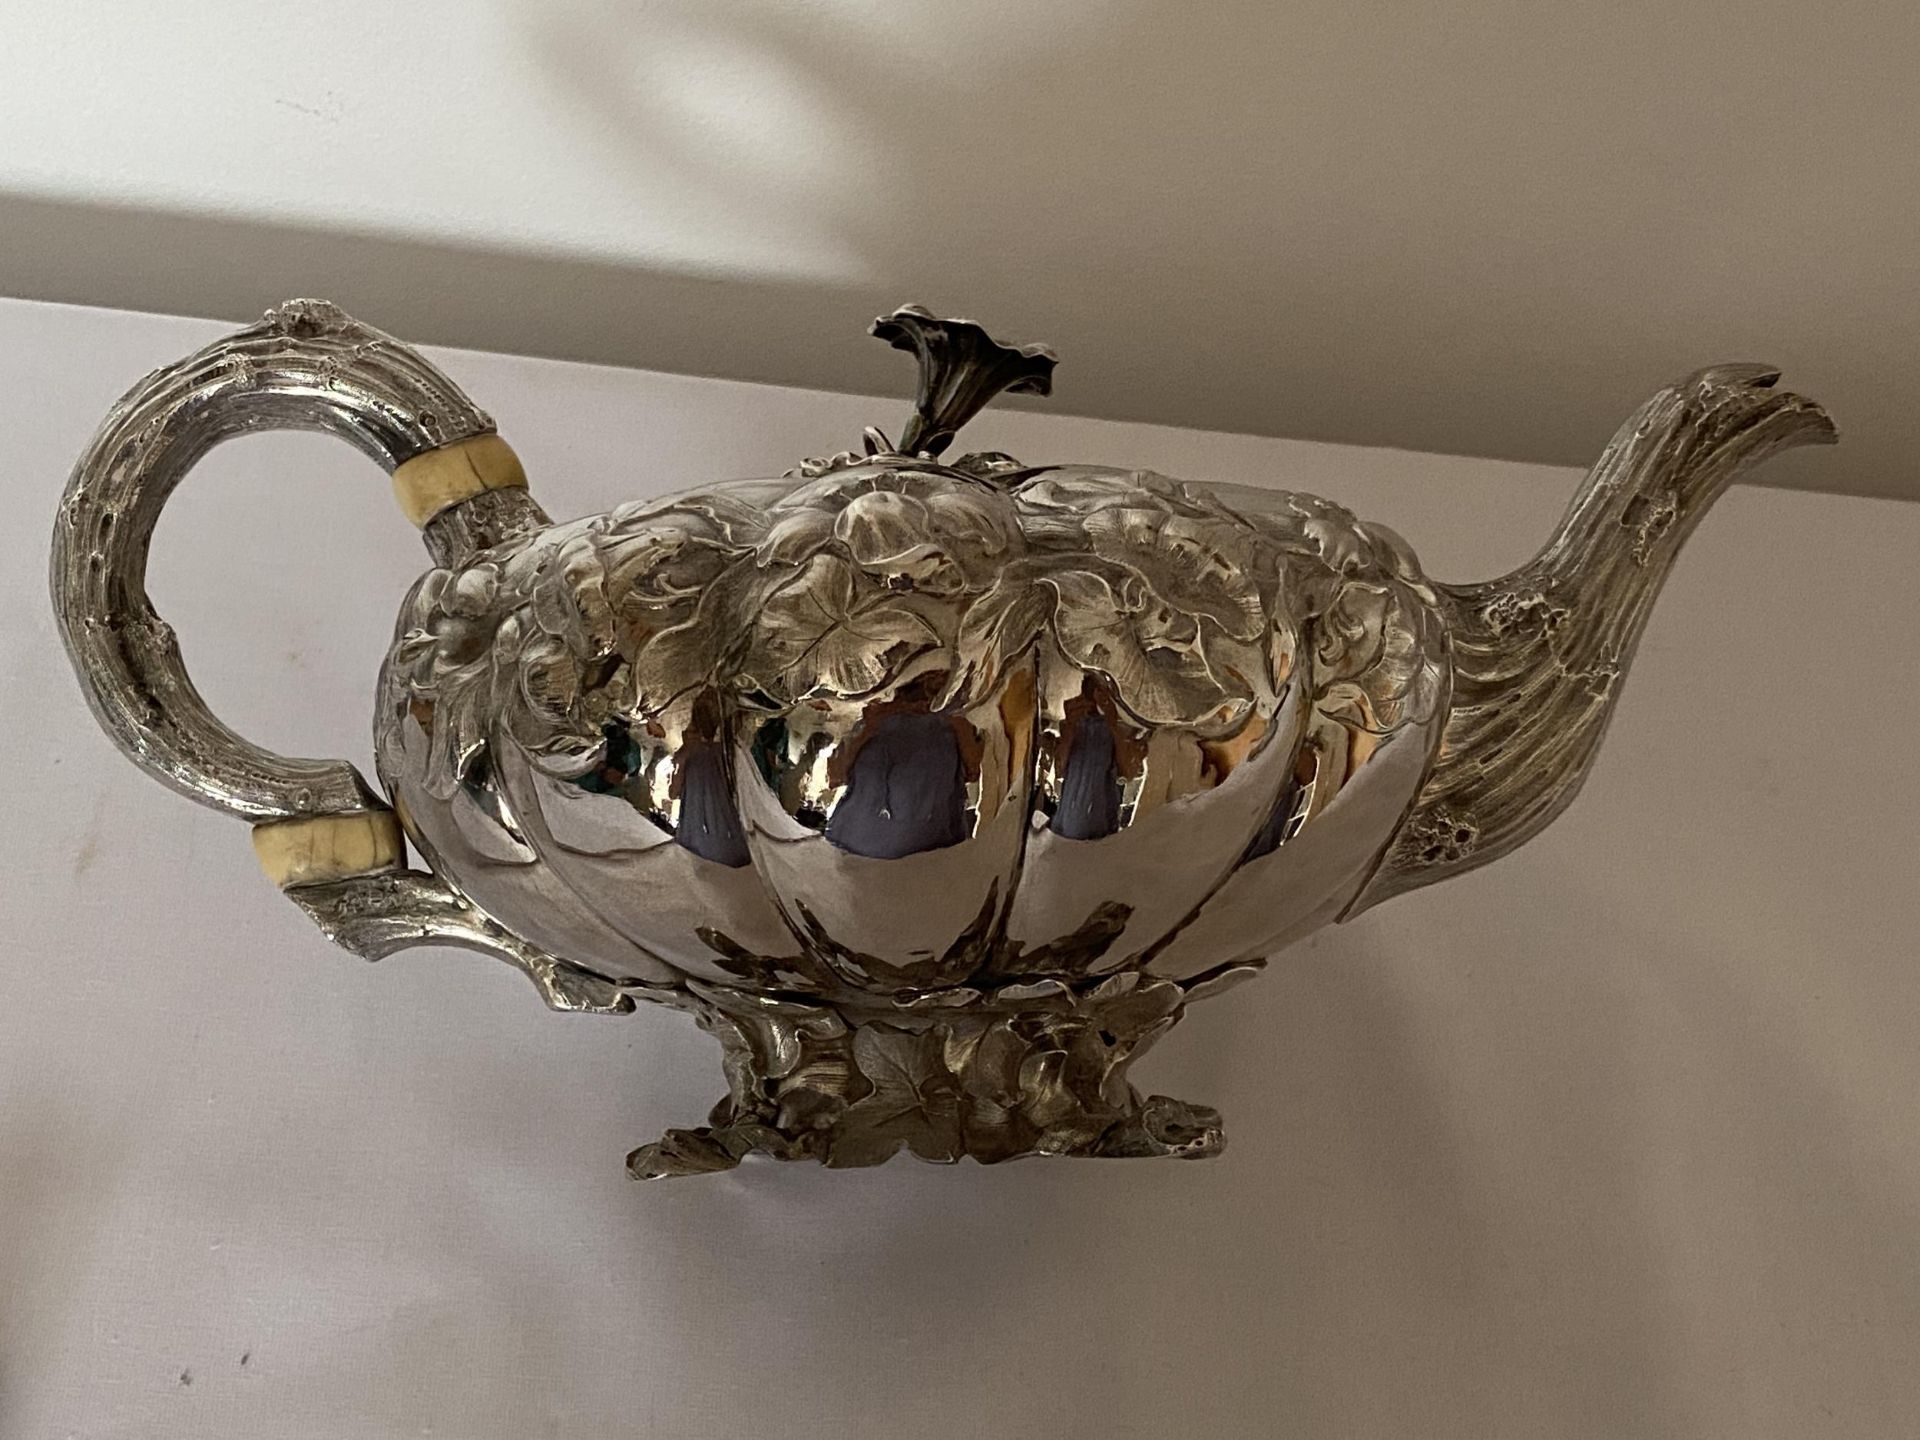 A VICTORIAN 1840 HALLMARKED LONDON SILVER TEAPOT, MAKER WC, POSSIBLY WILLIAM CHANDLESS, GROSS WEIGHT - Image 15 of 21